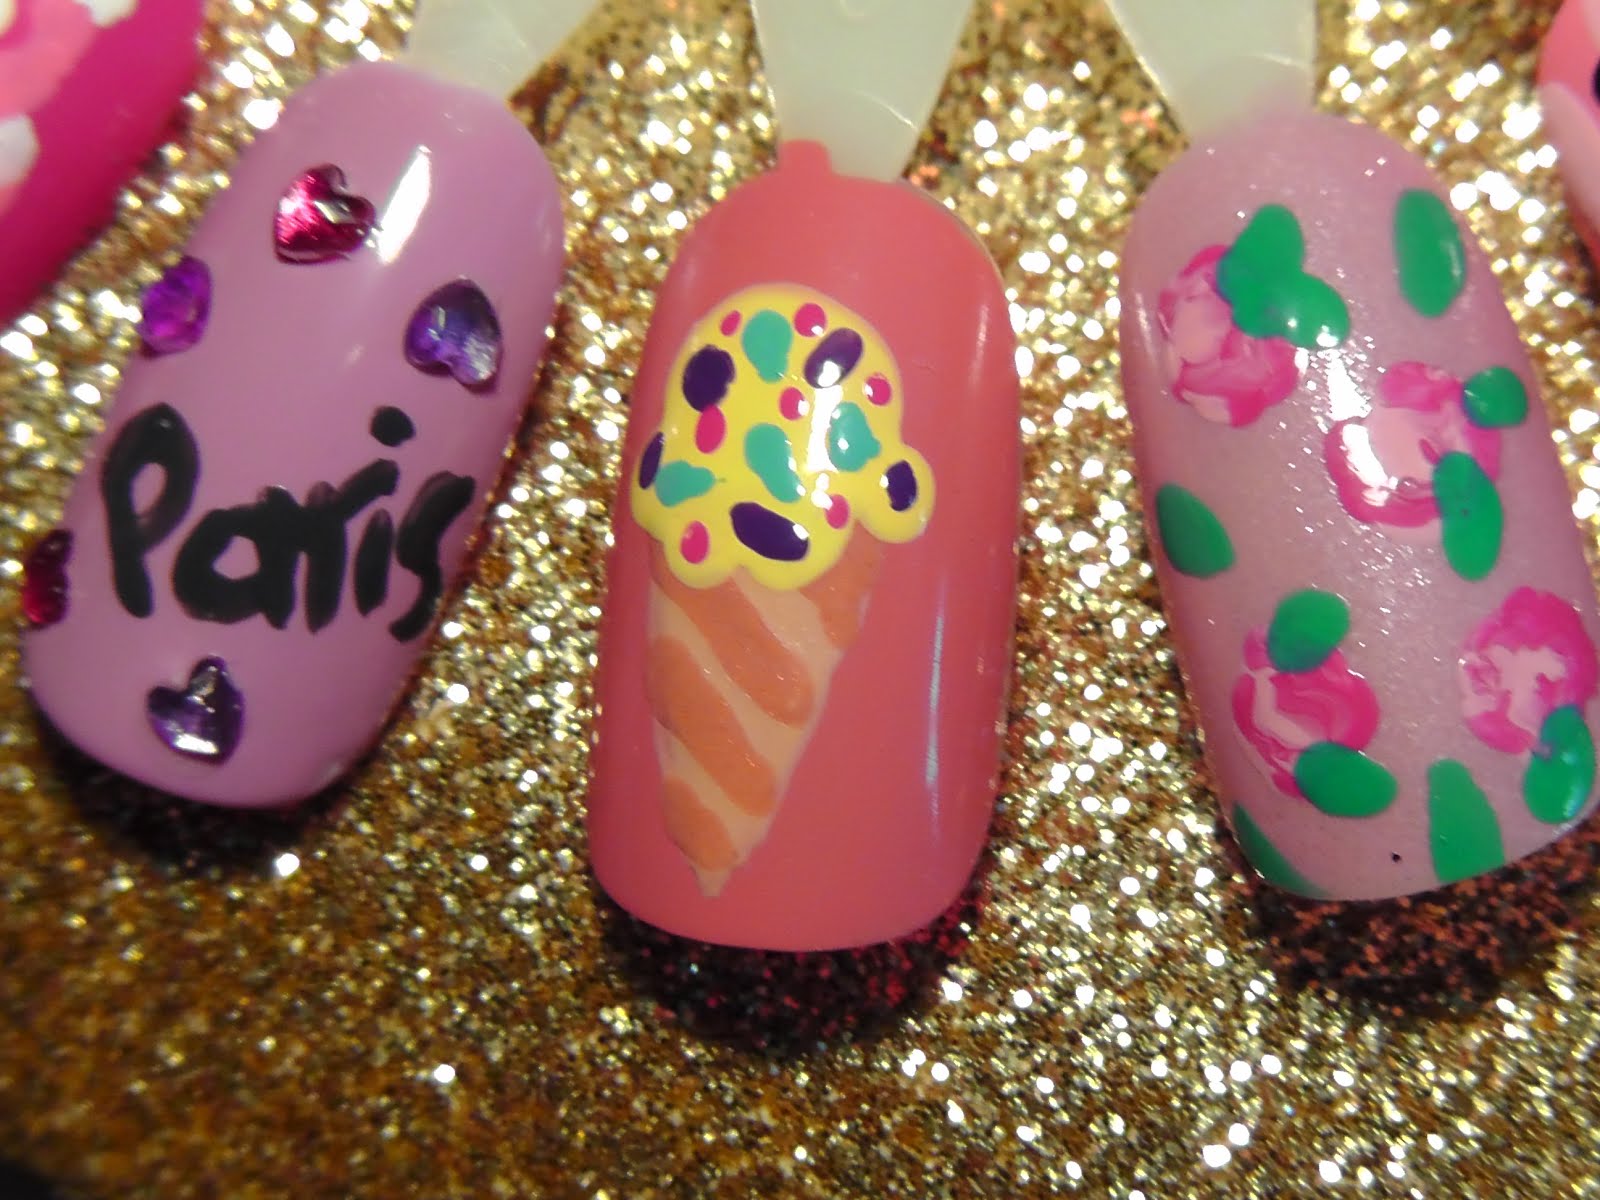 2. Girly Nail Art Inspiration on Tumblr - wide 3